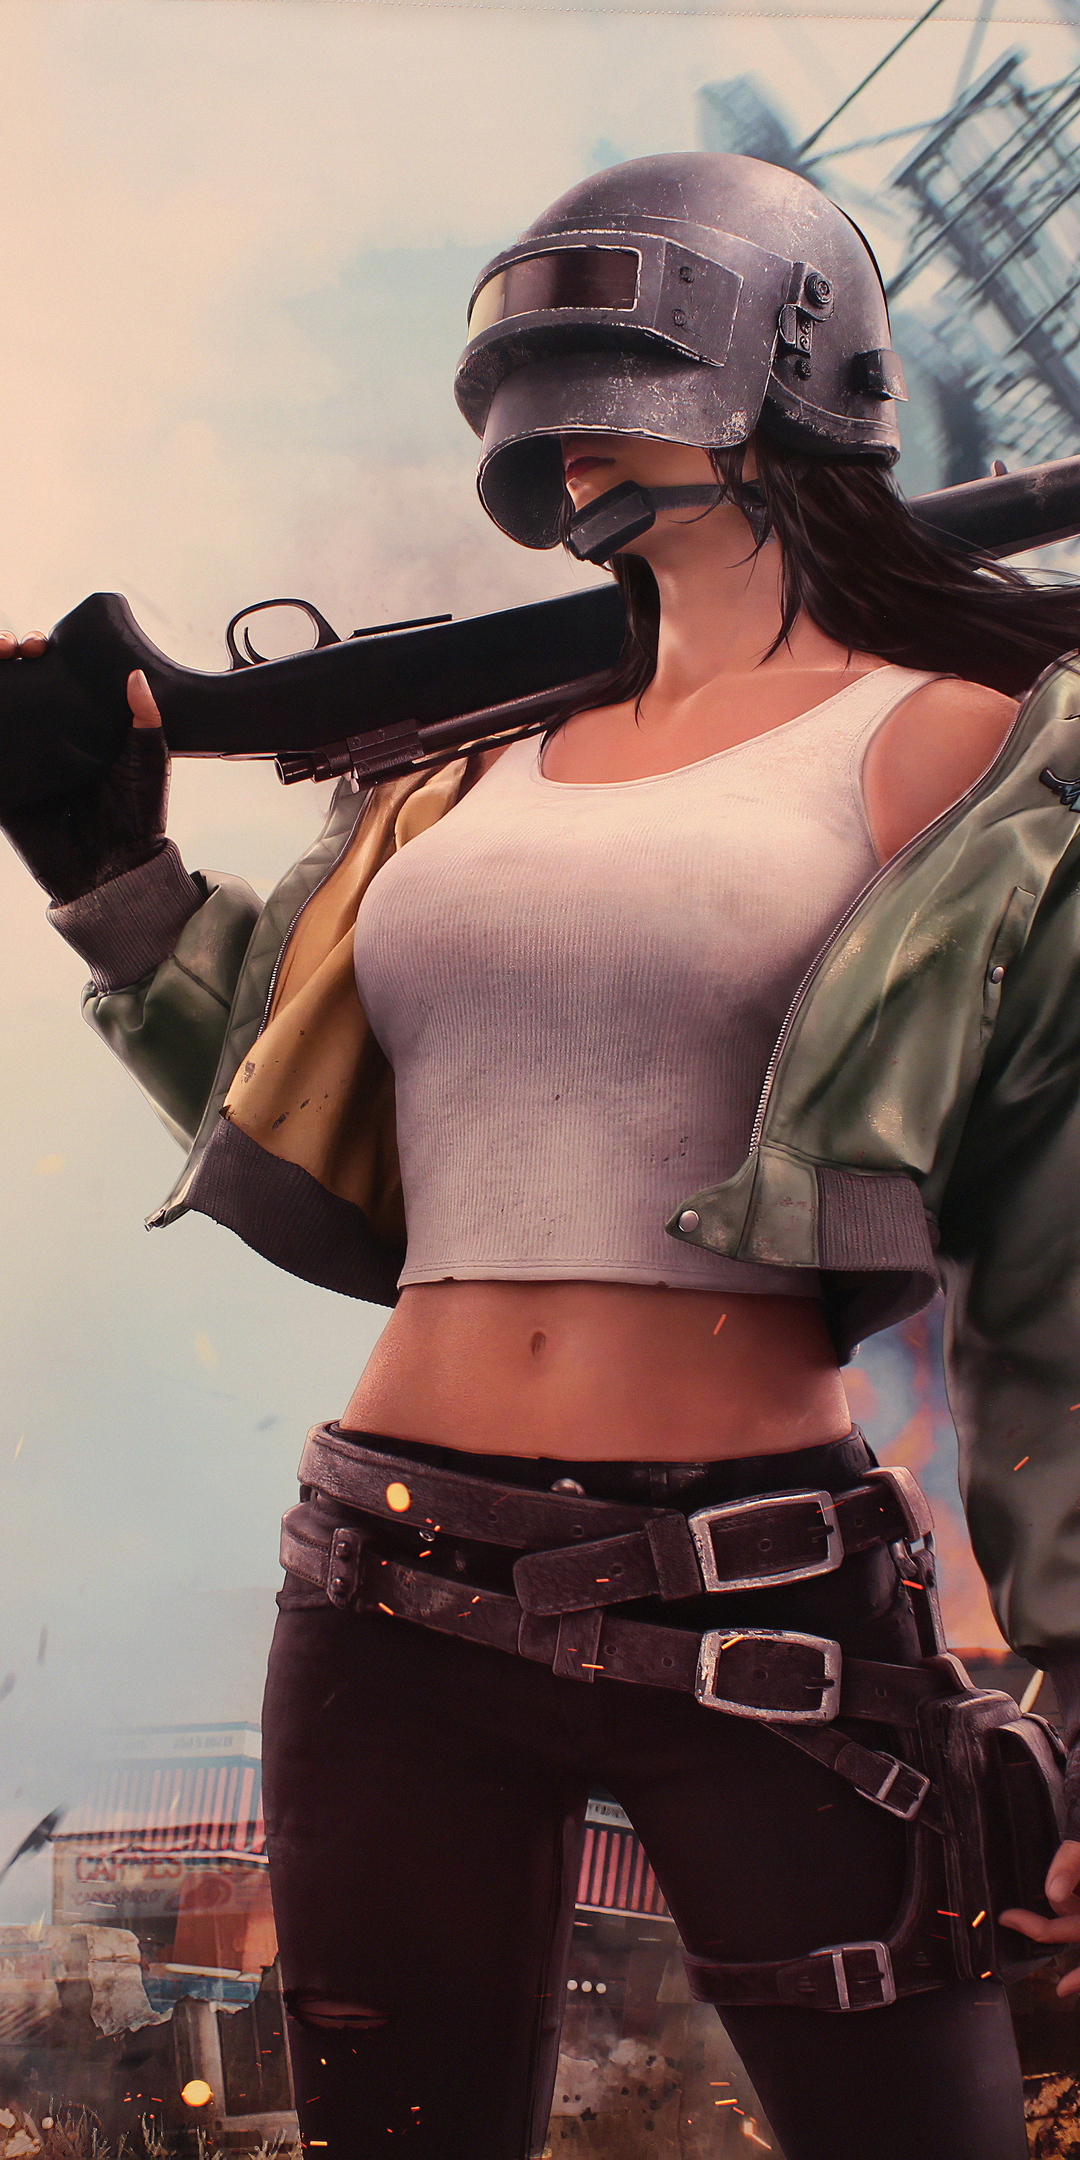 1080x2160 Pubg Helmet Girl 4k One Plus 5T,Honor 7x,Honor view 10,Lg Q6 HD  4k Wallpapers, Images, Backgrounds, Photos and Pictures